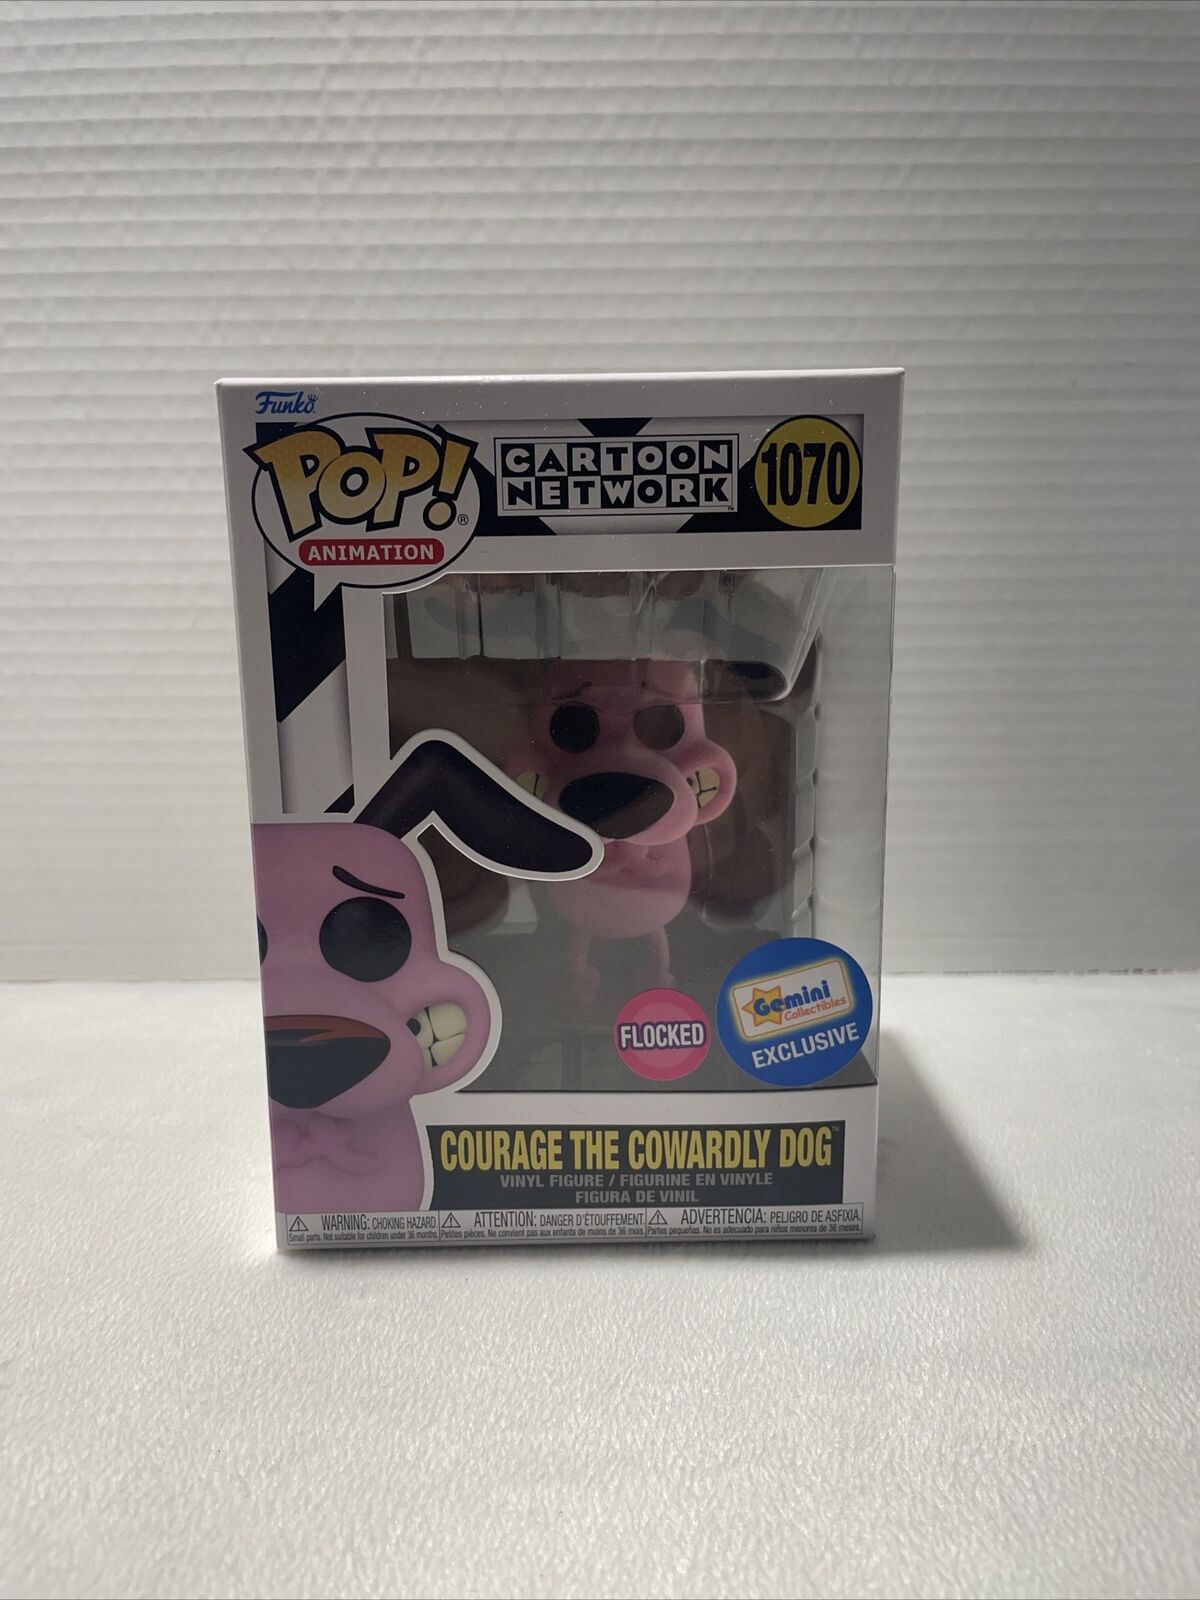 FUNKO POP ANIMATION CARTOON NETWORK COURAGE THE COWARDLY DOG FLOCKED GEMINI EXCL